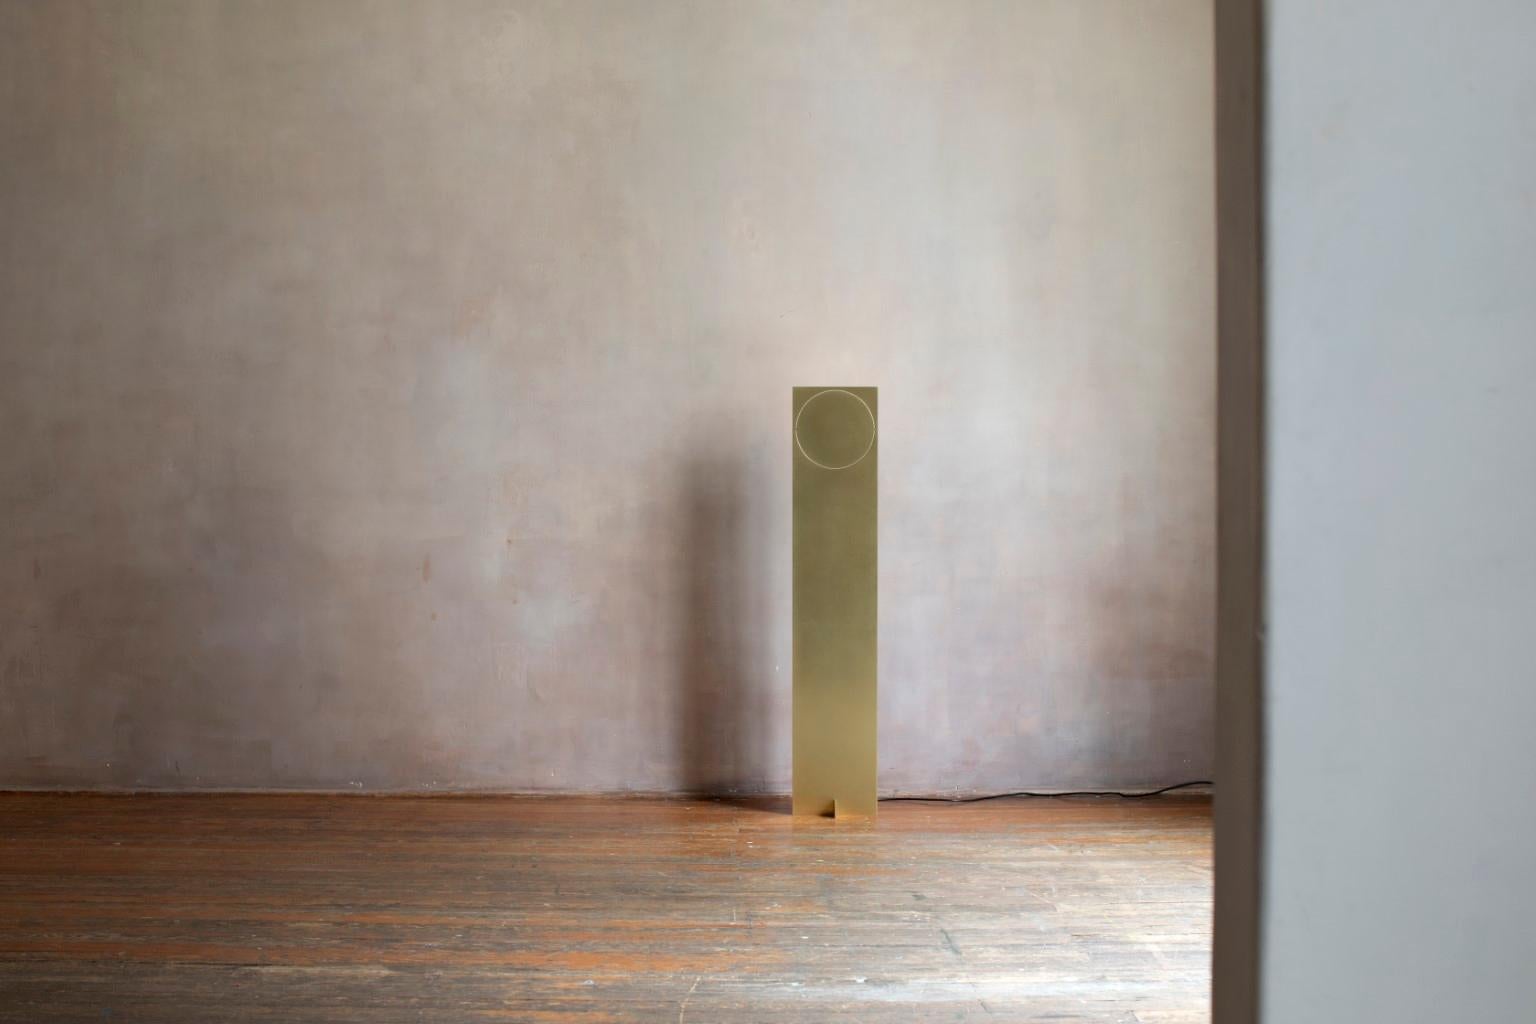  OBJ-01 Brass Floor Lamp by Manu Bano For Sale 5